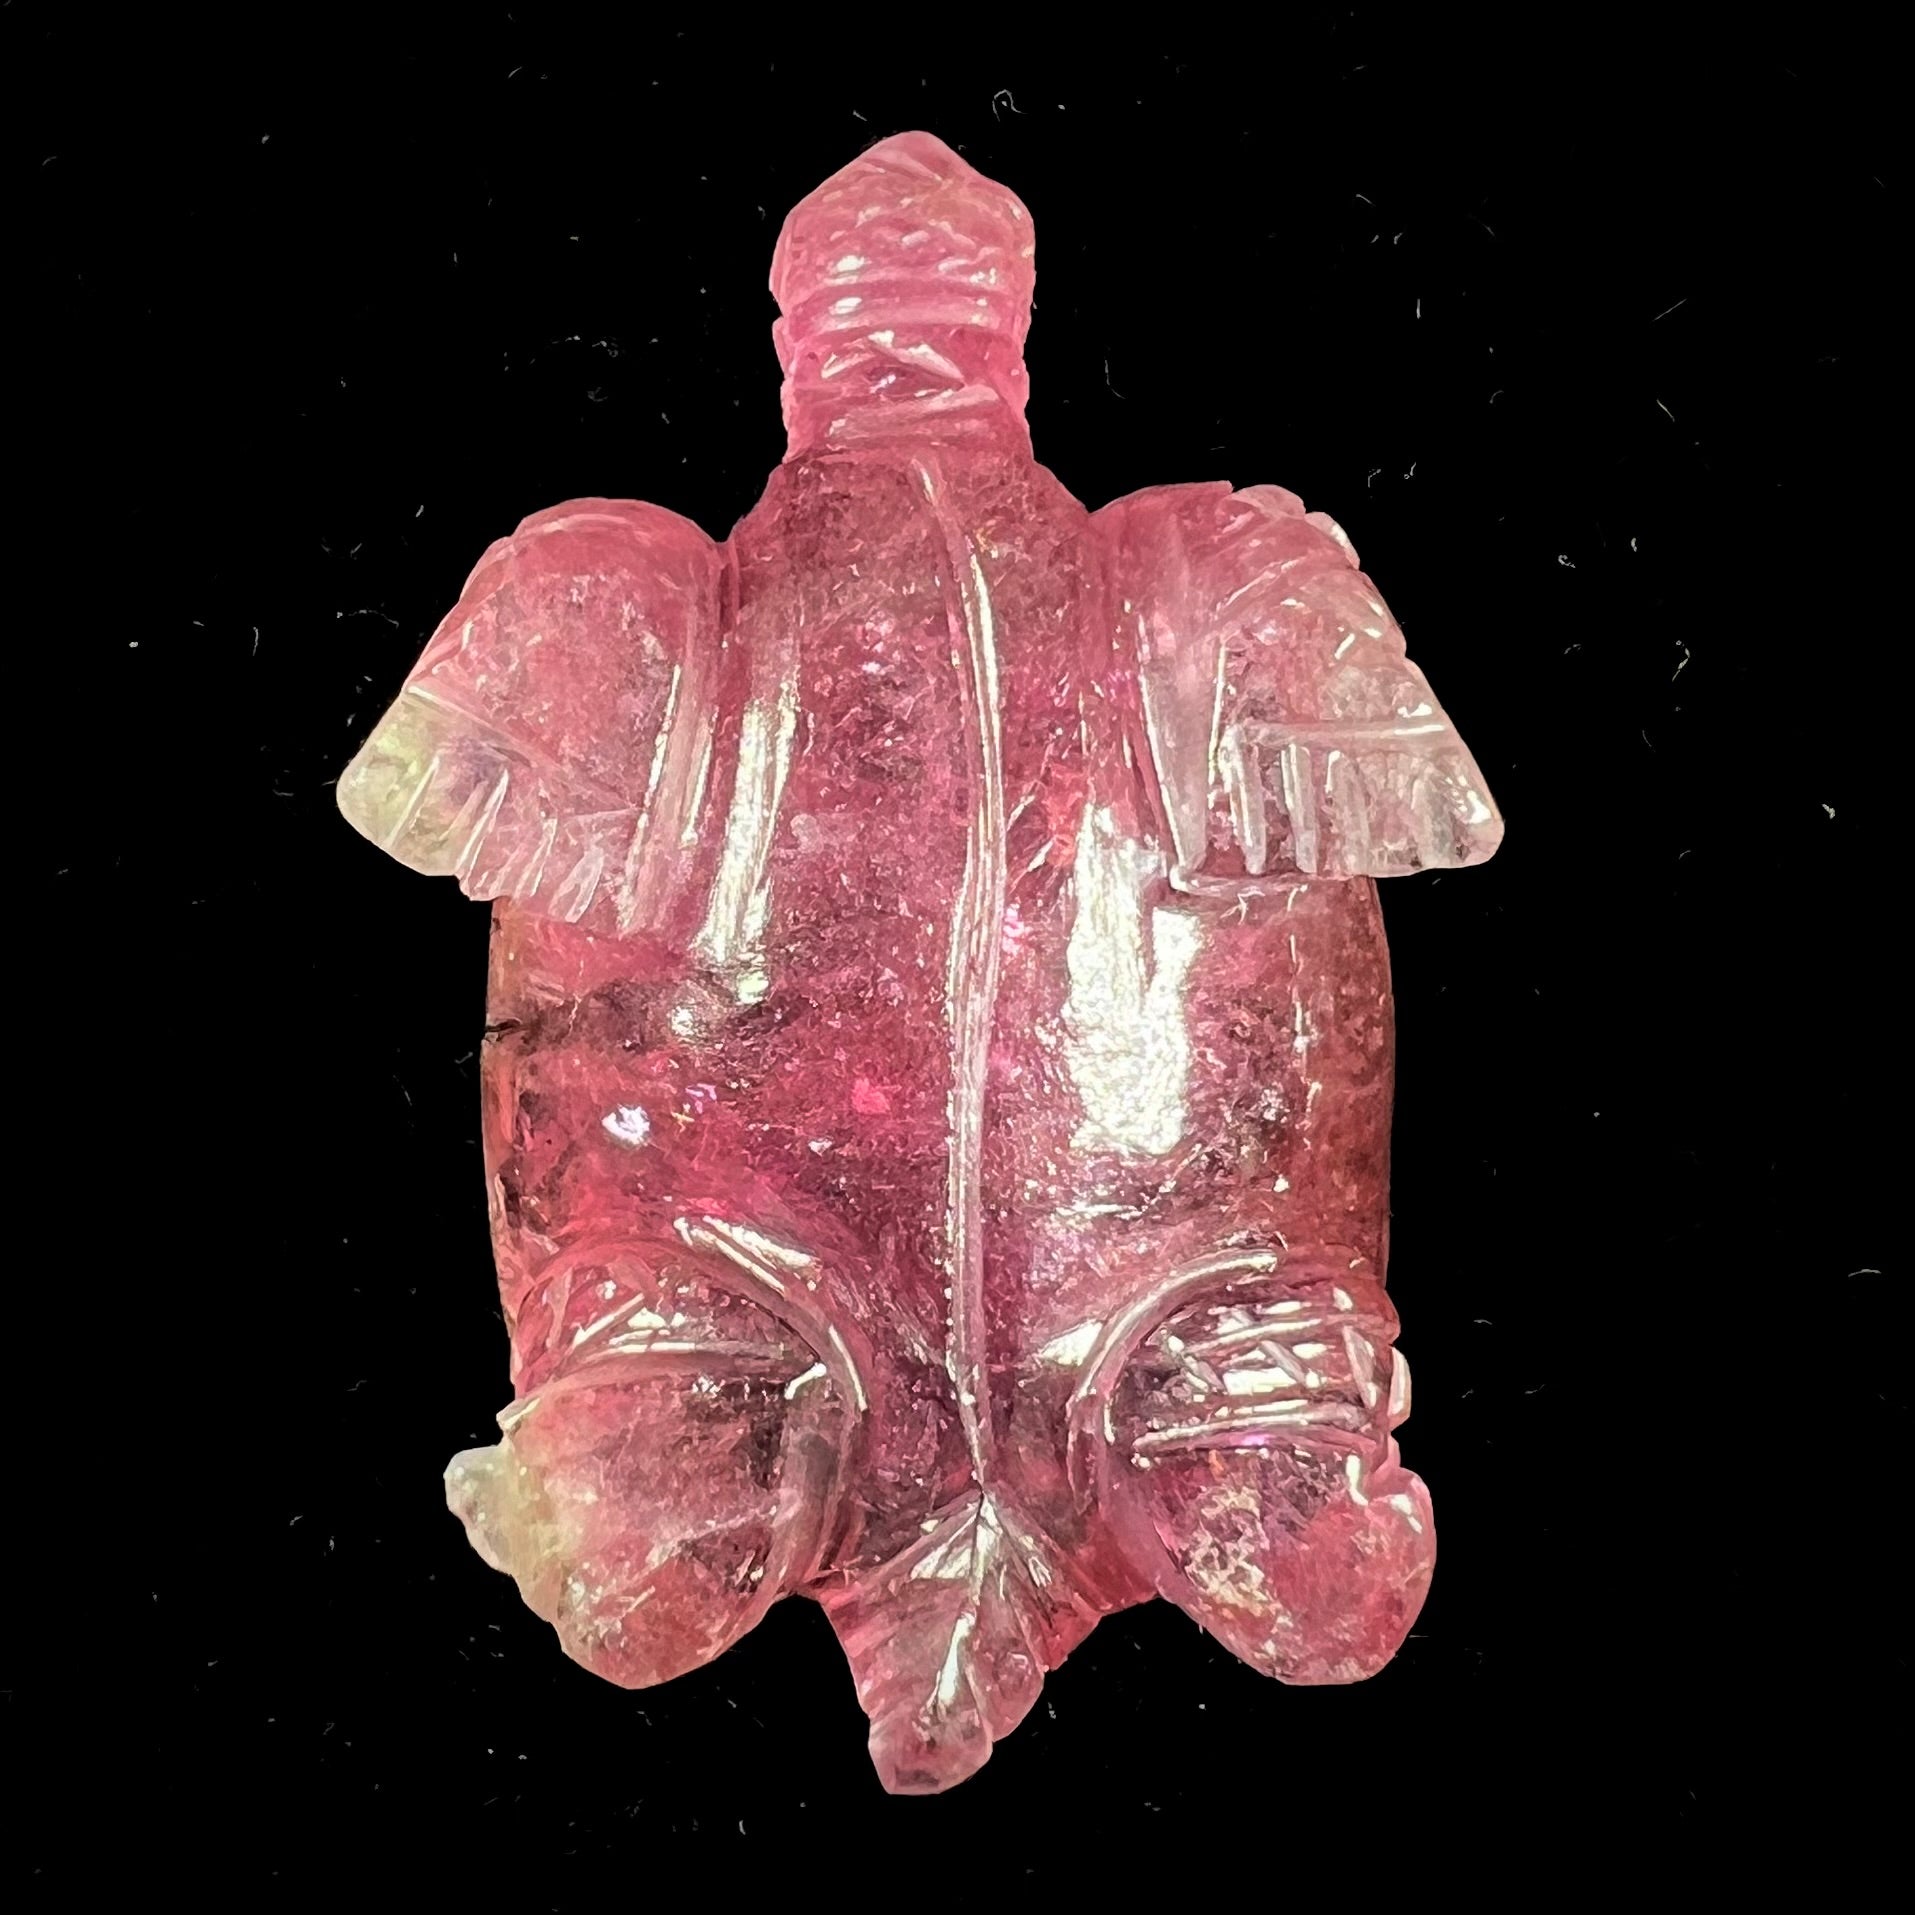 A crystal turtle carved from a pink tourmaline stone.